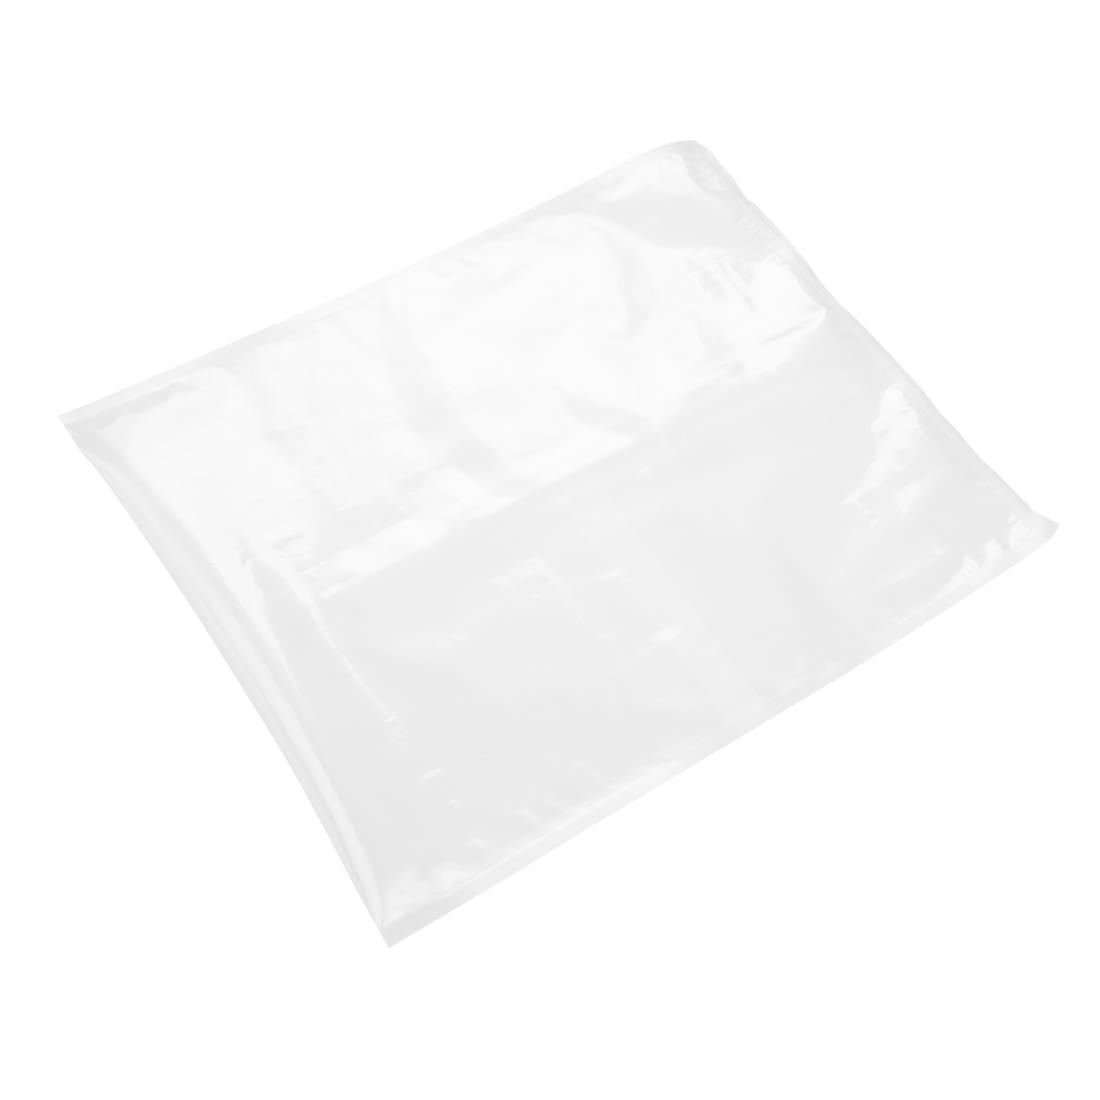 CU398 Vogue Chamber Vacuum Pack Bags 400x500mm (Pack of 50)